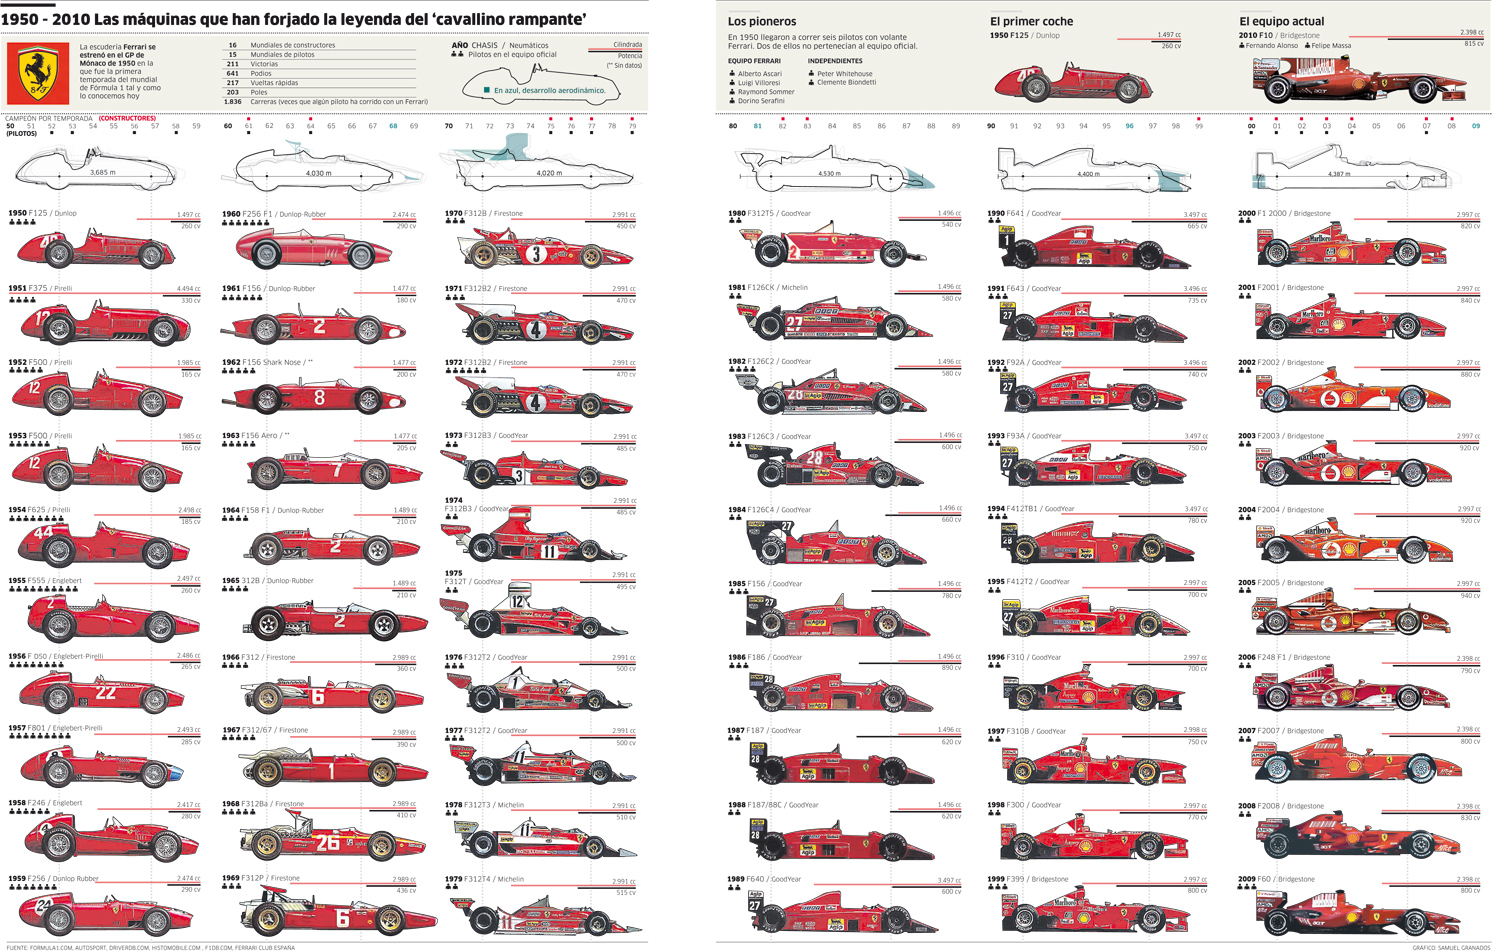 Ferrari Pictures by Year